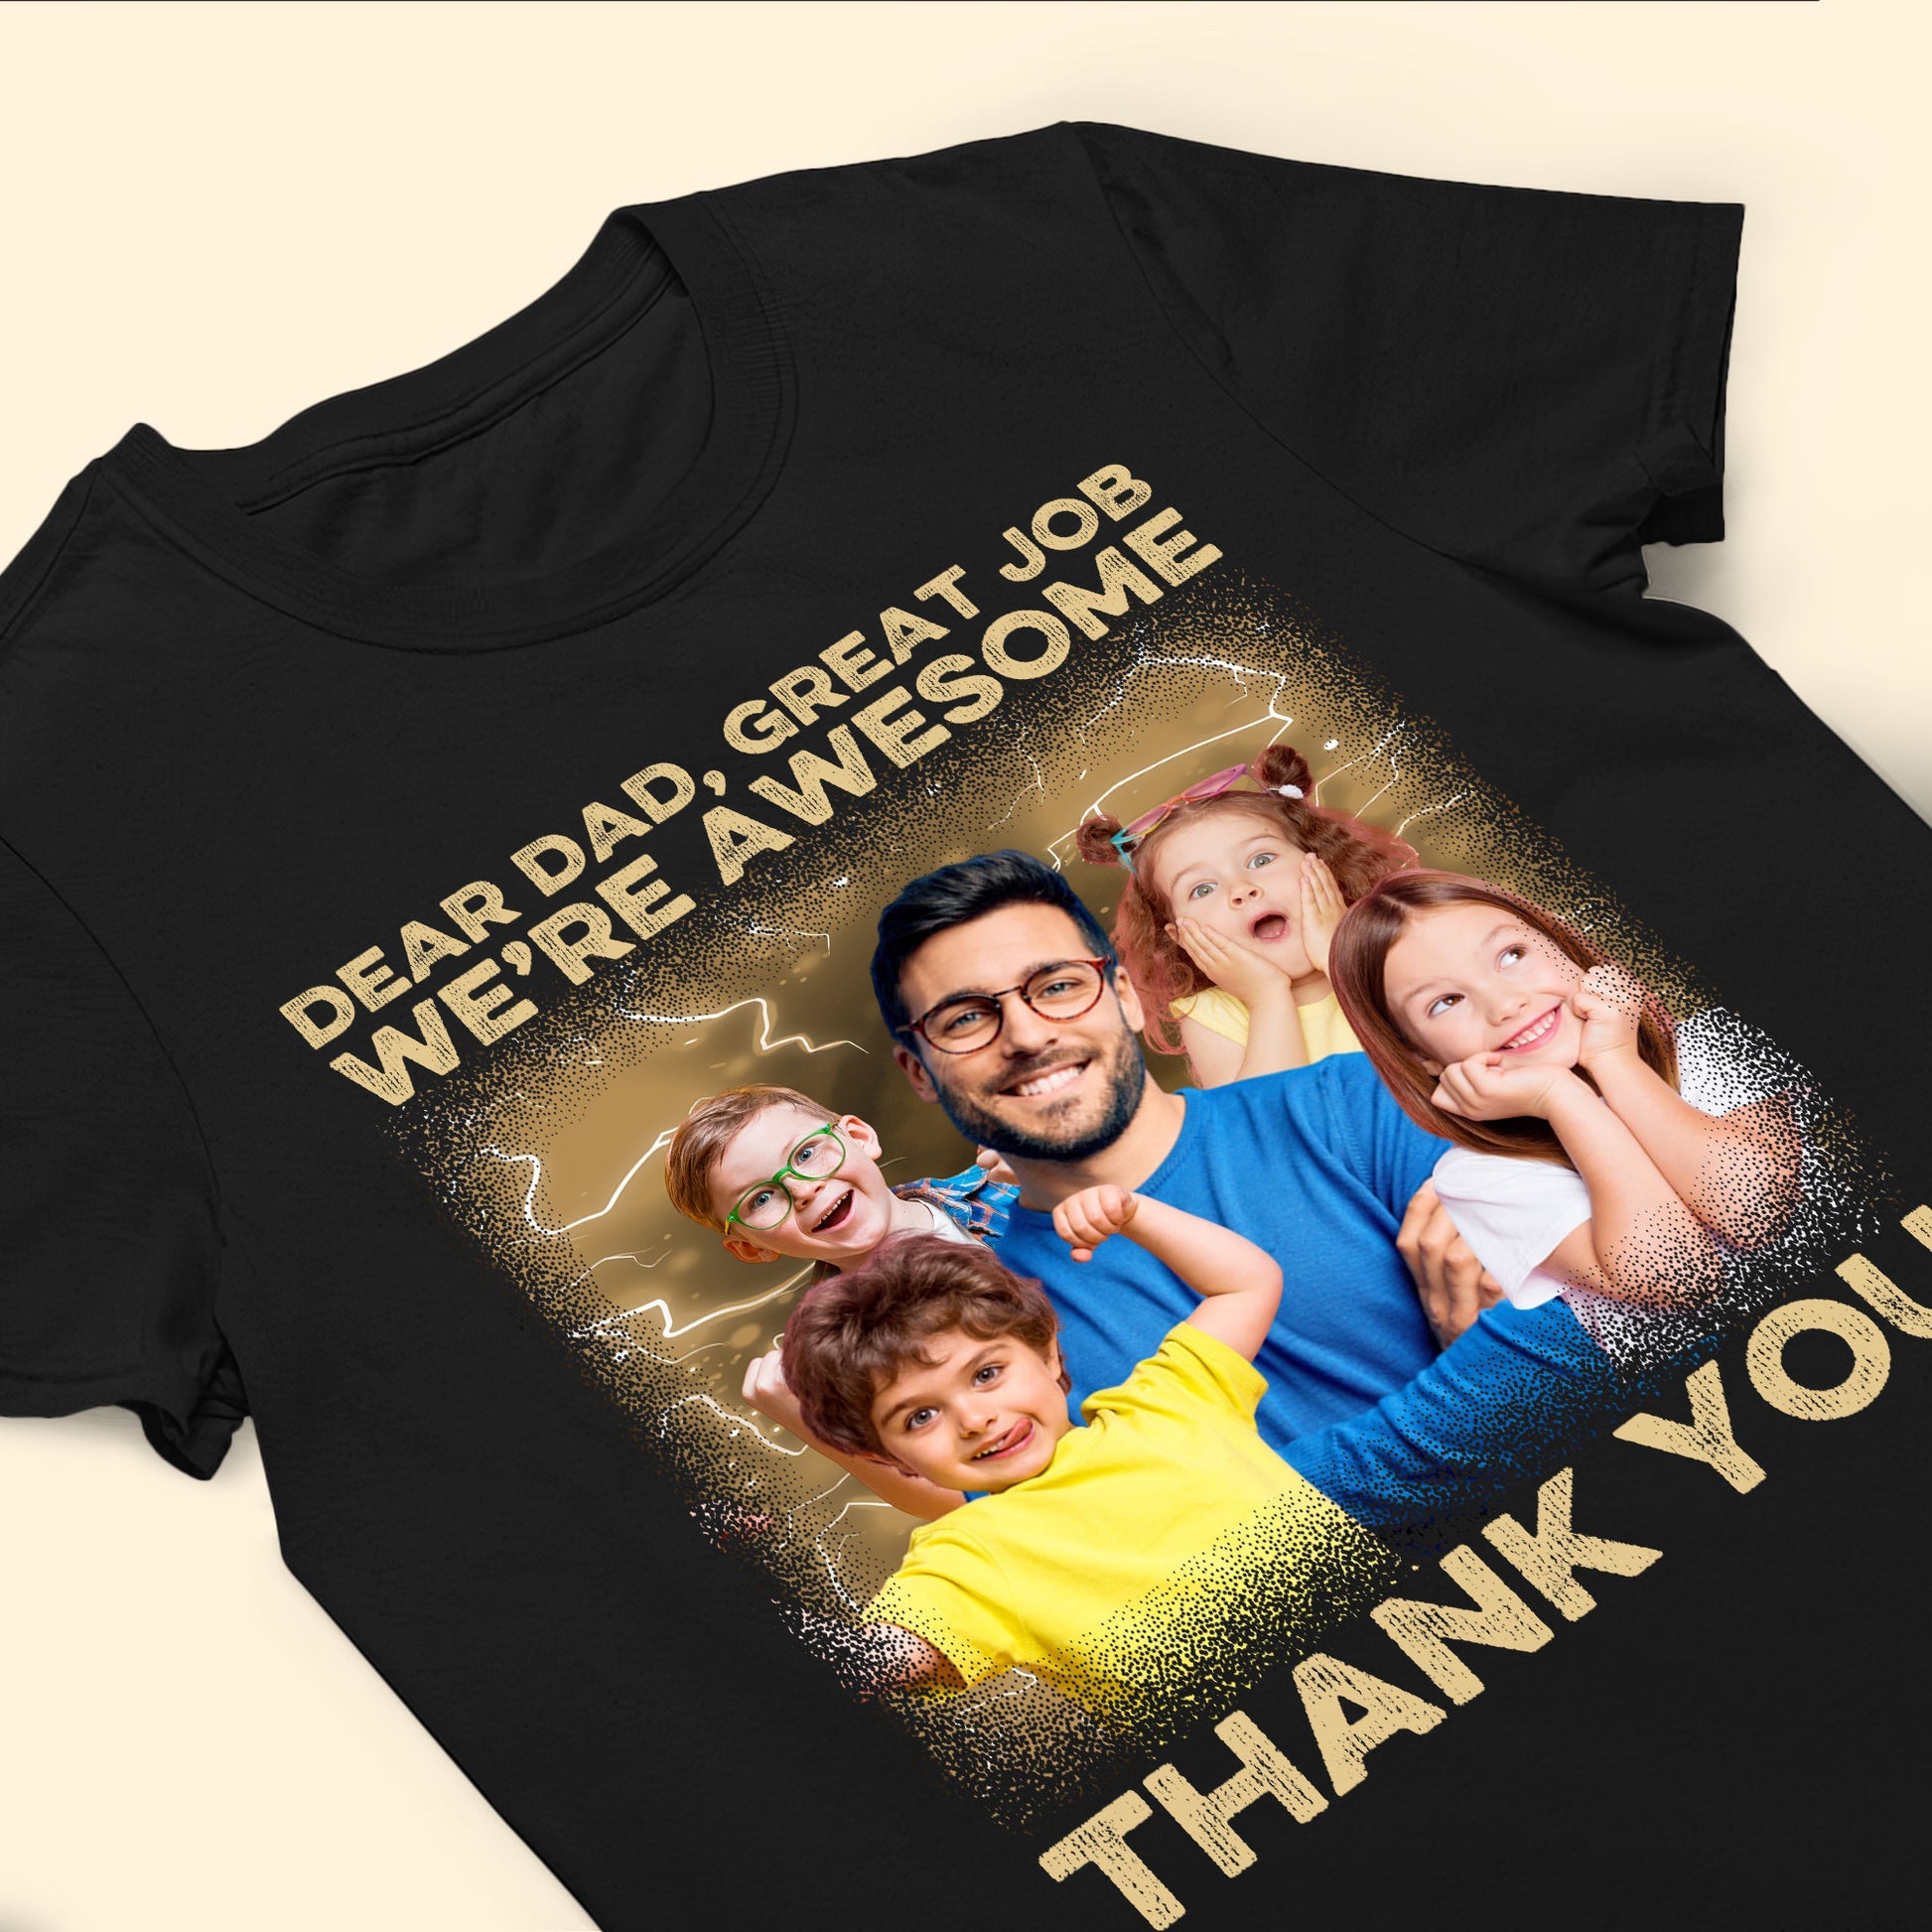 Great Job We're Awesome Vintage Bootleg Tee - Personalized Photo Shirt For Dad